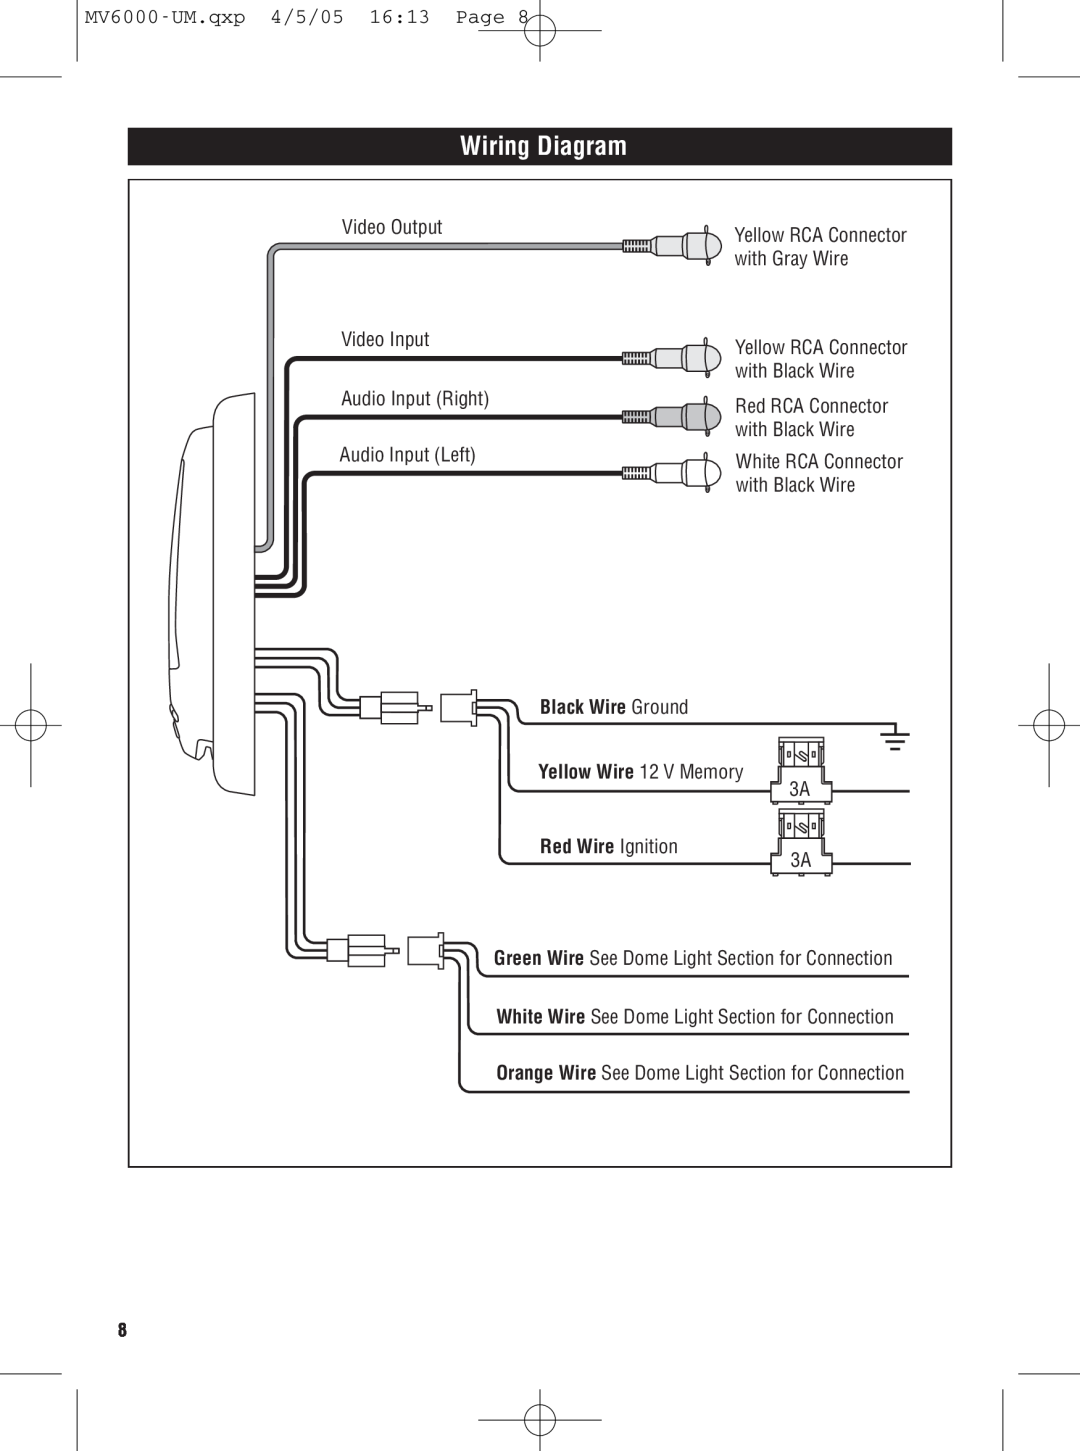 Magnadyne MV6000C owner manual Wiring Diagram, MV6000-UM.qxp 4/5/05 1613 Page, Video Output, with Gray Wire, Video Input 